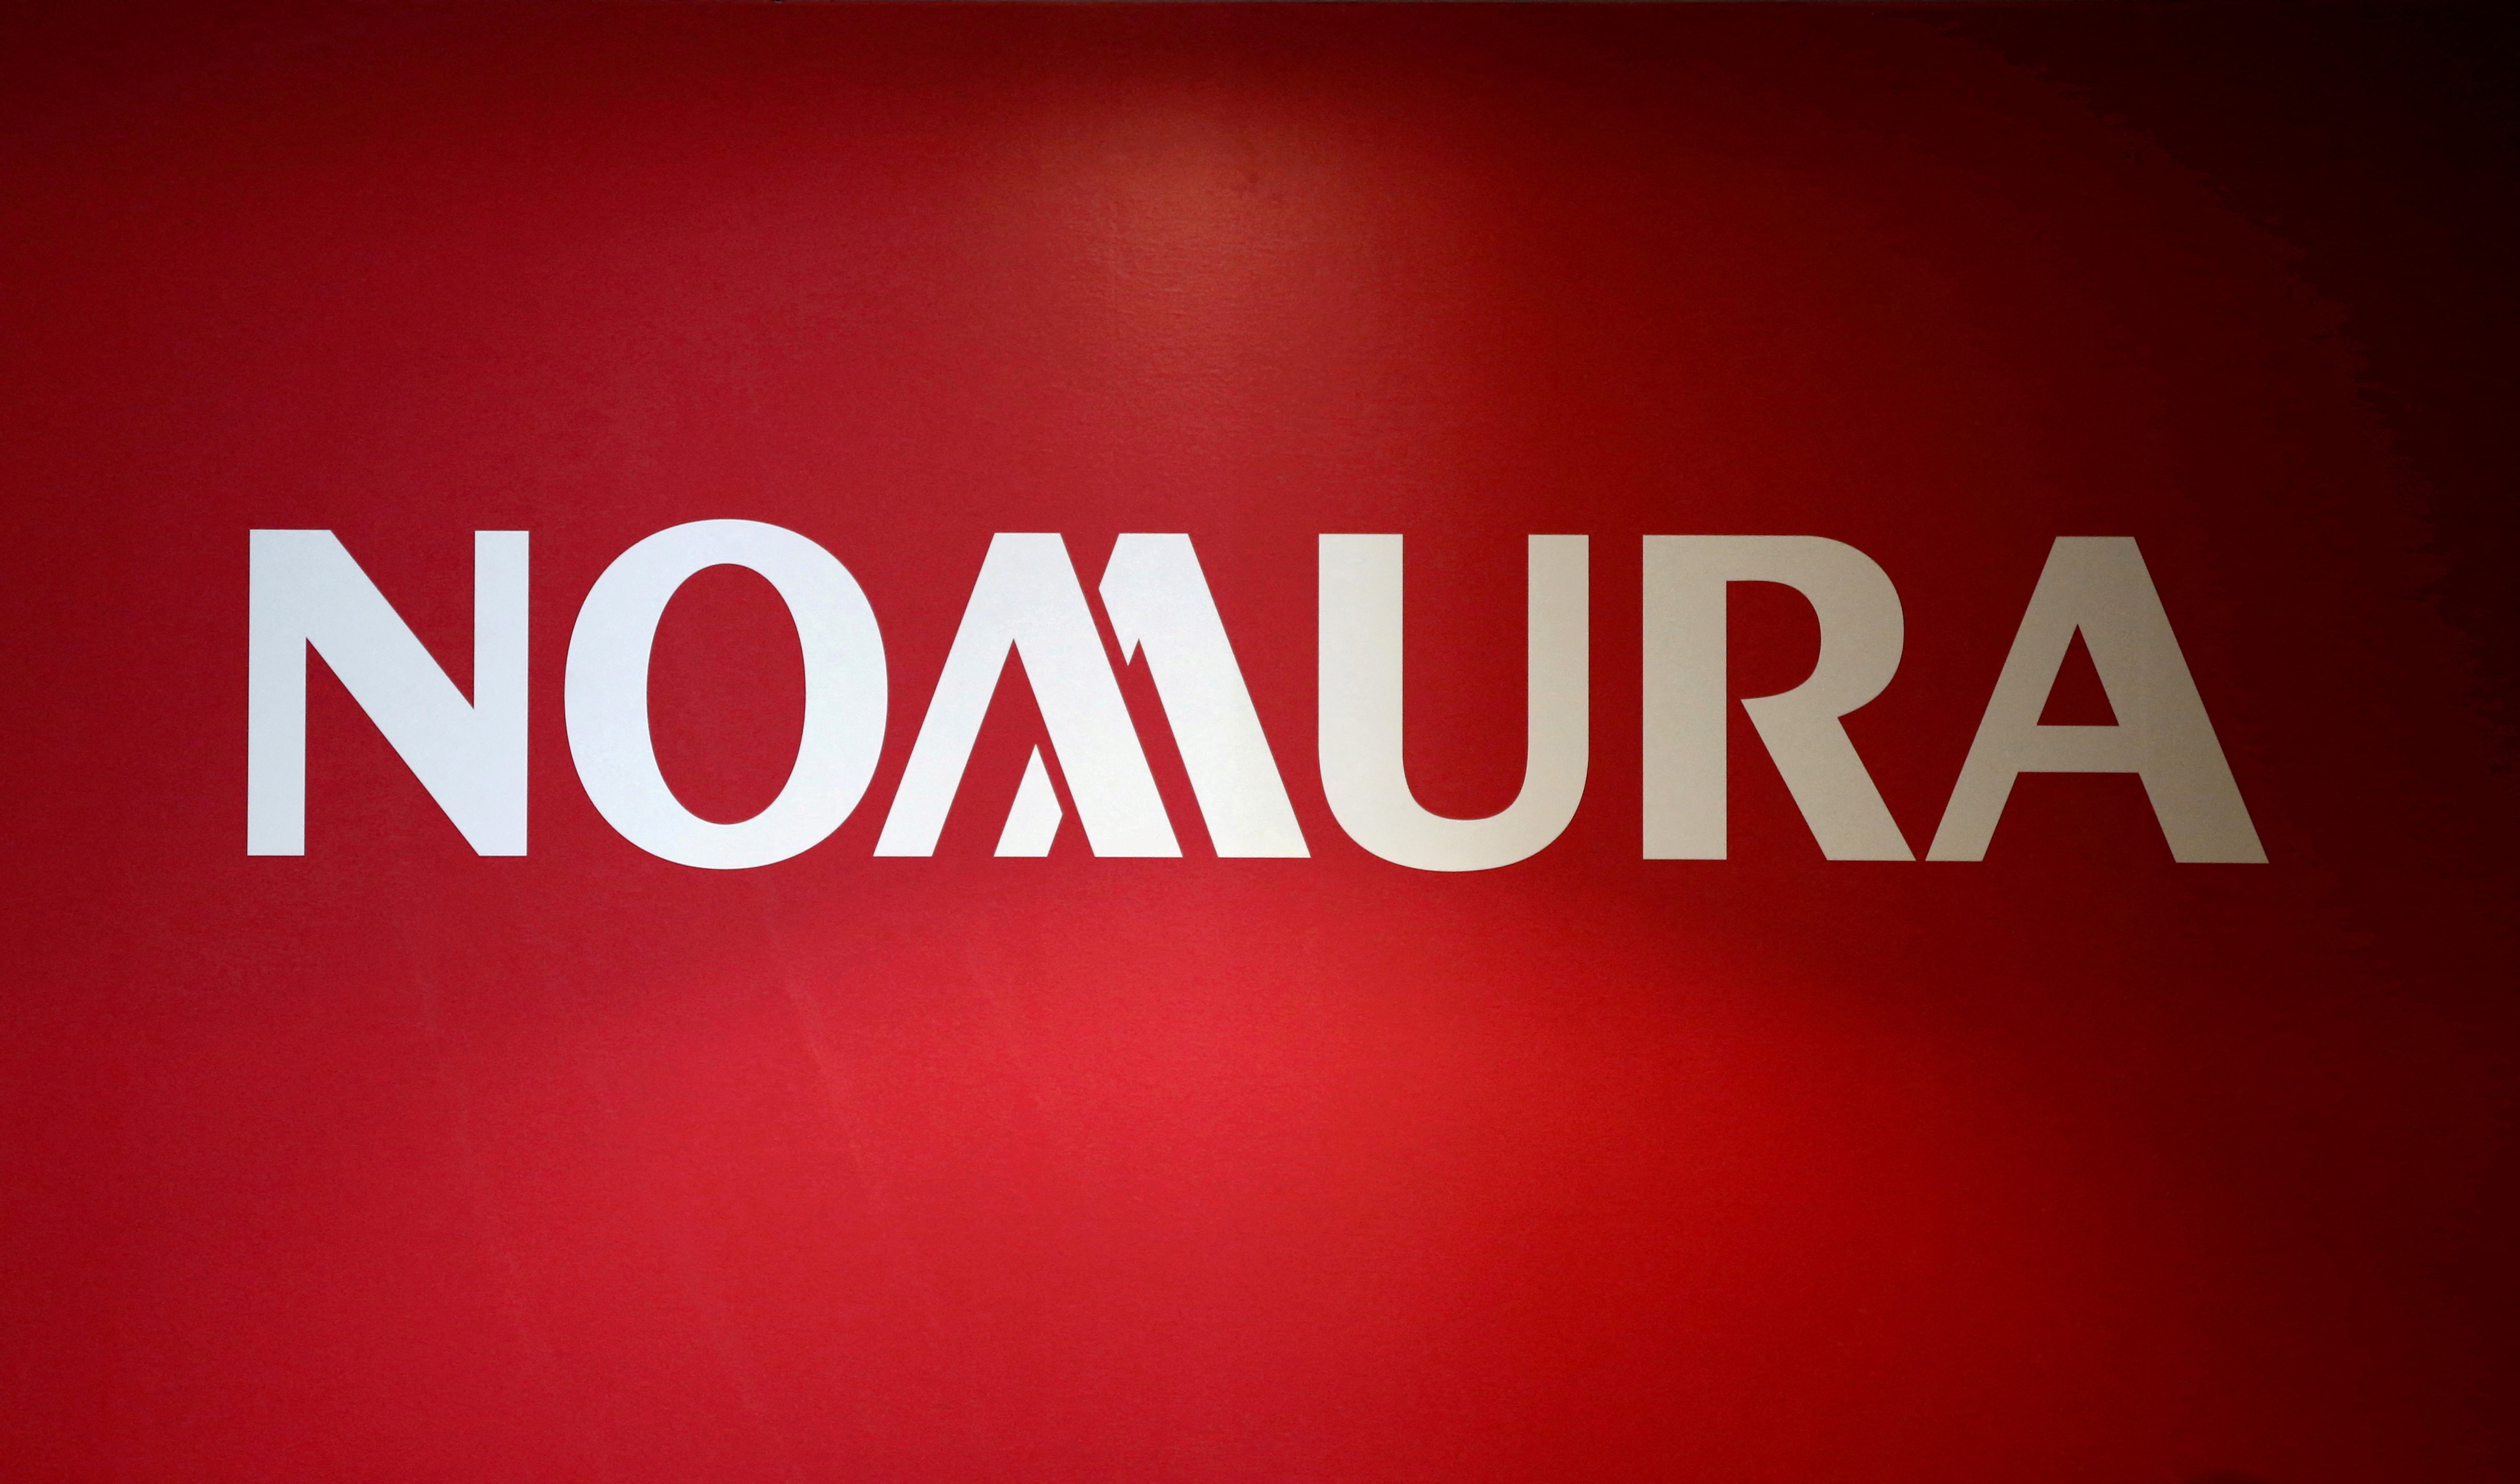 vccircle.com - Nomura India's head of investment banking steps down